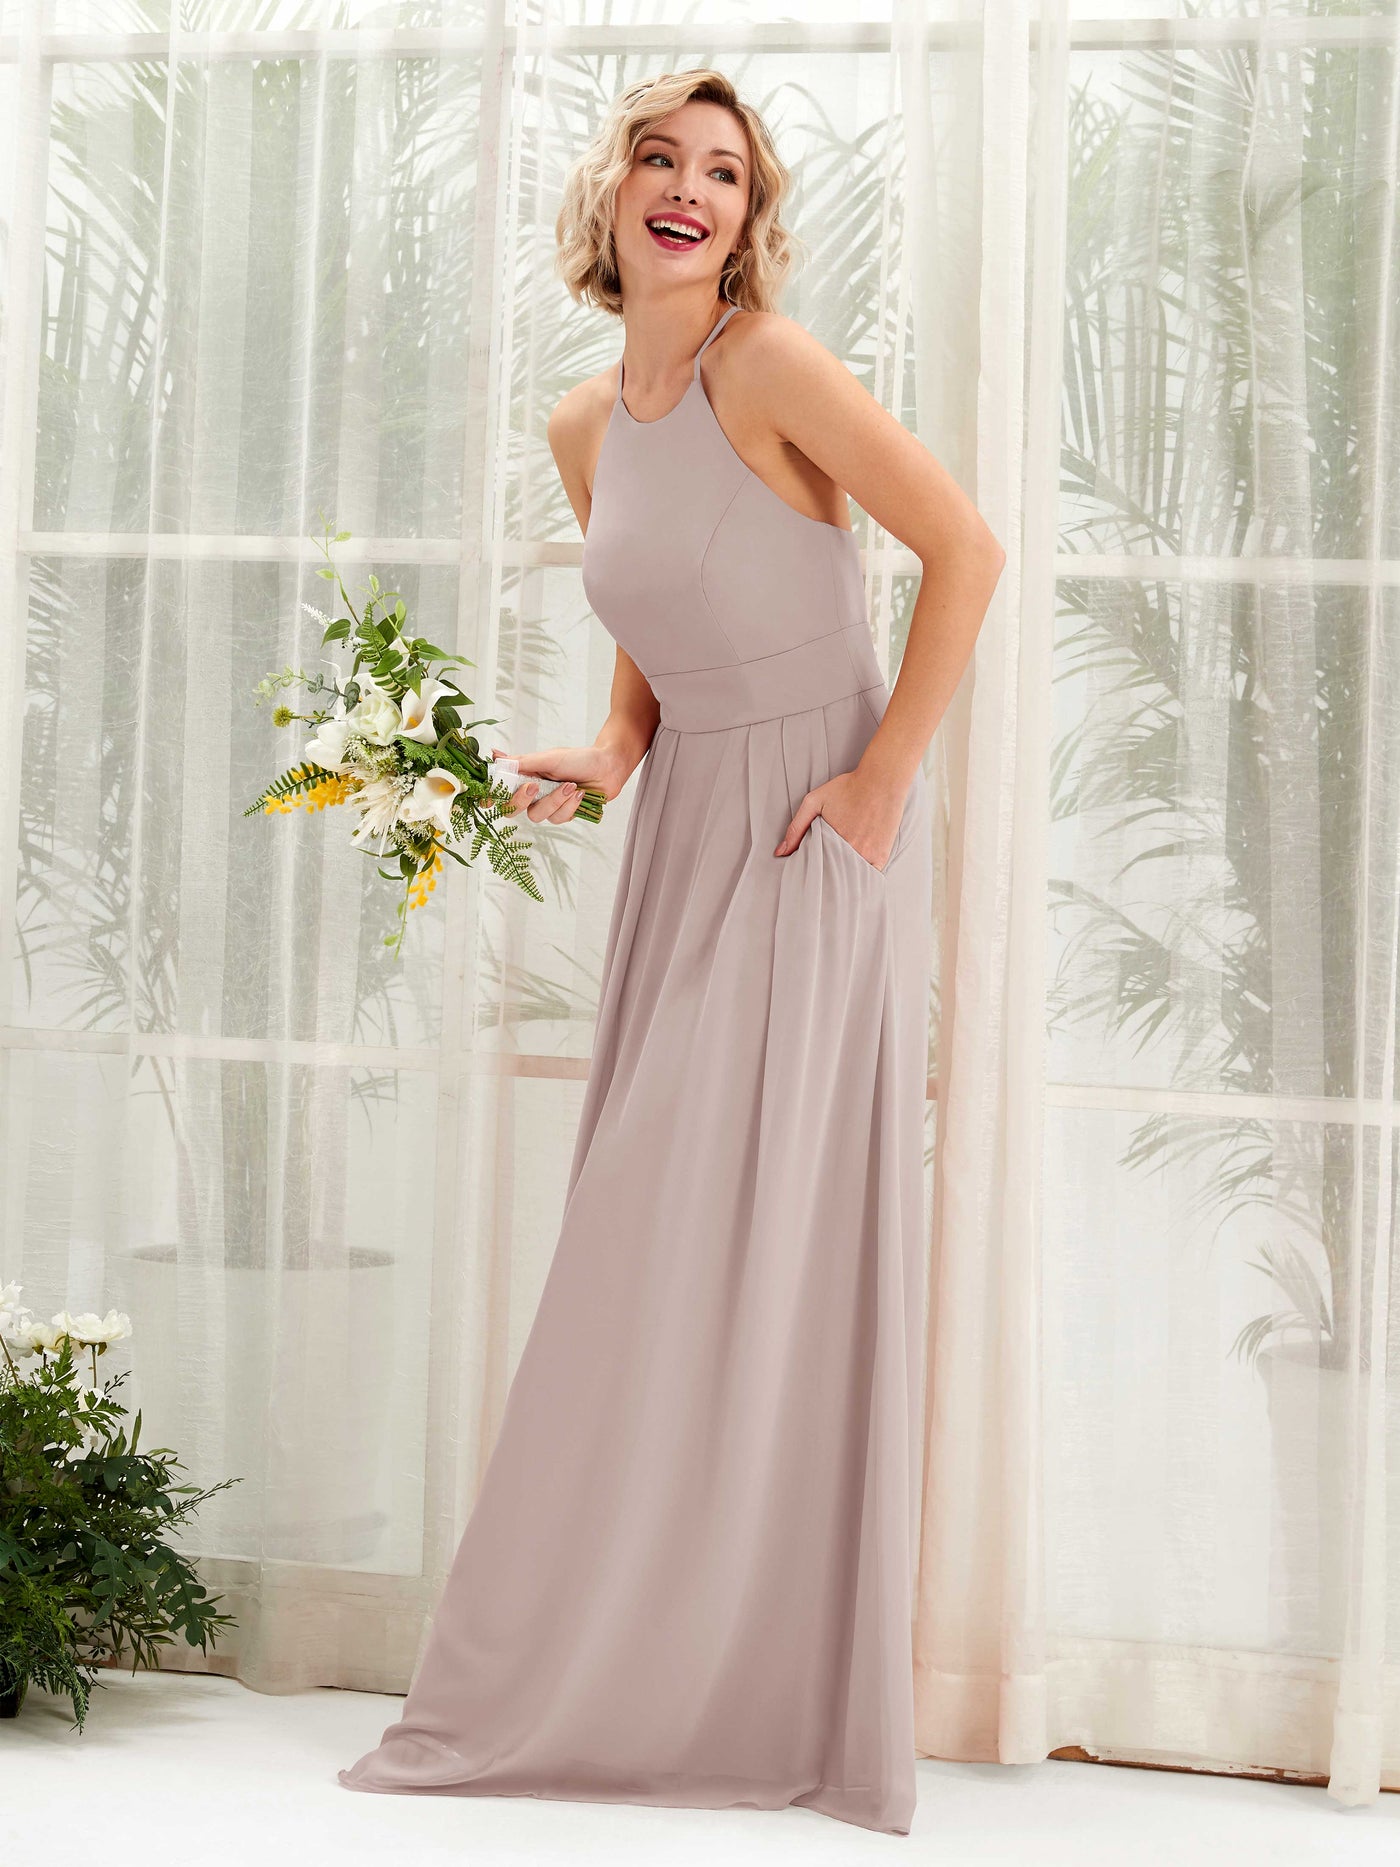 A-line Ball Gown Halter Spaghetti-straps Sleeveless Bridesmaid Dress - Taupe (81225224)#color_taupe